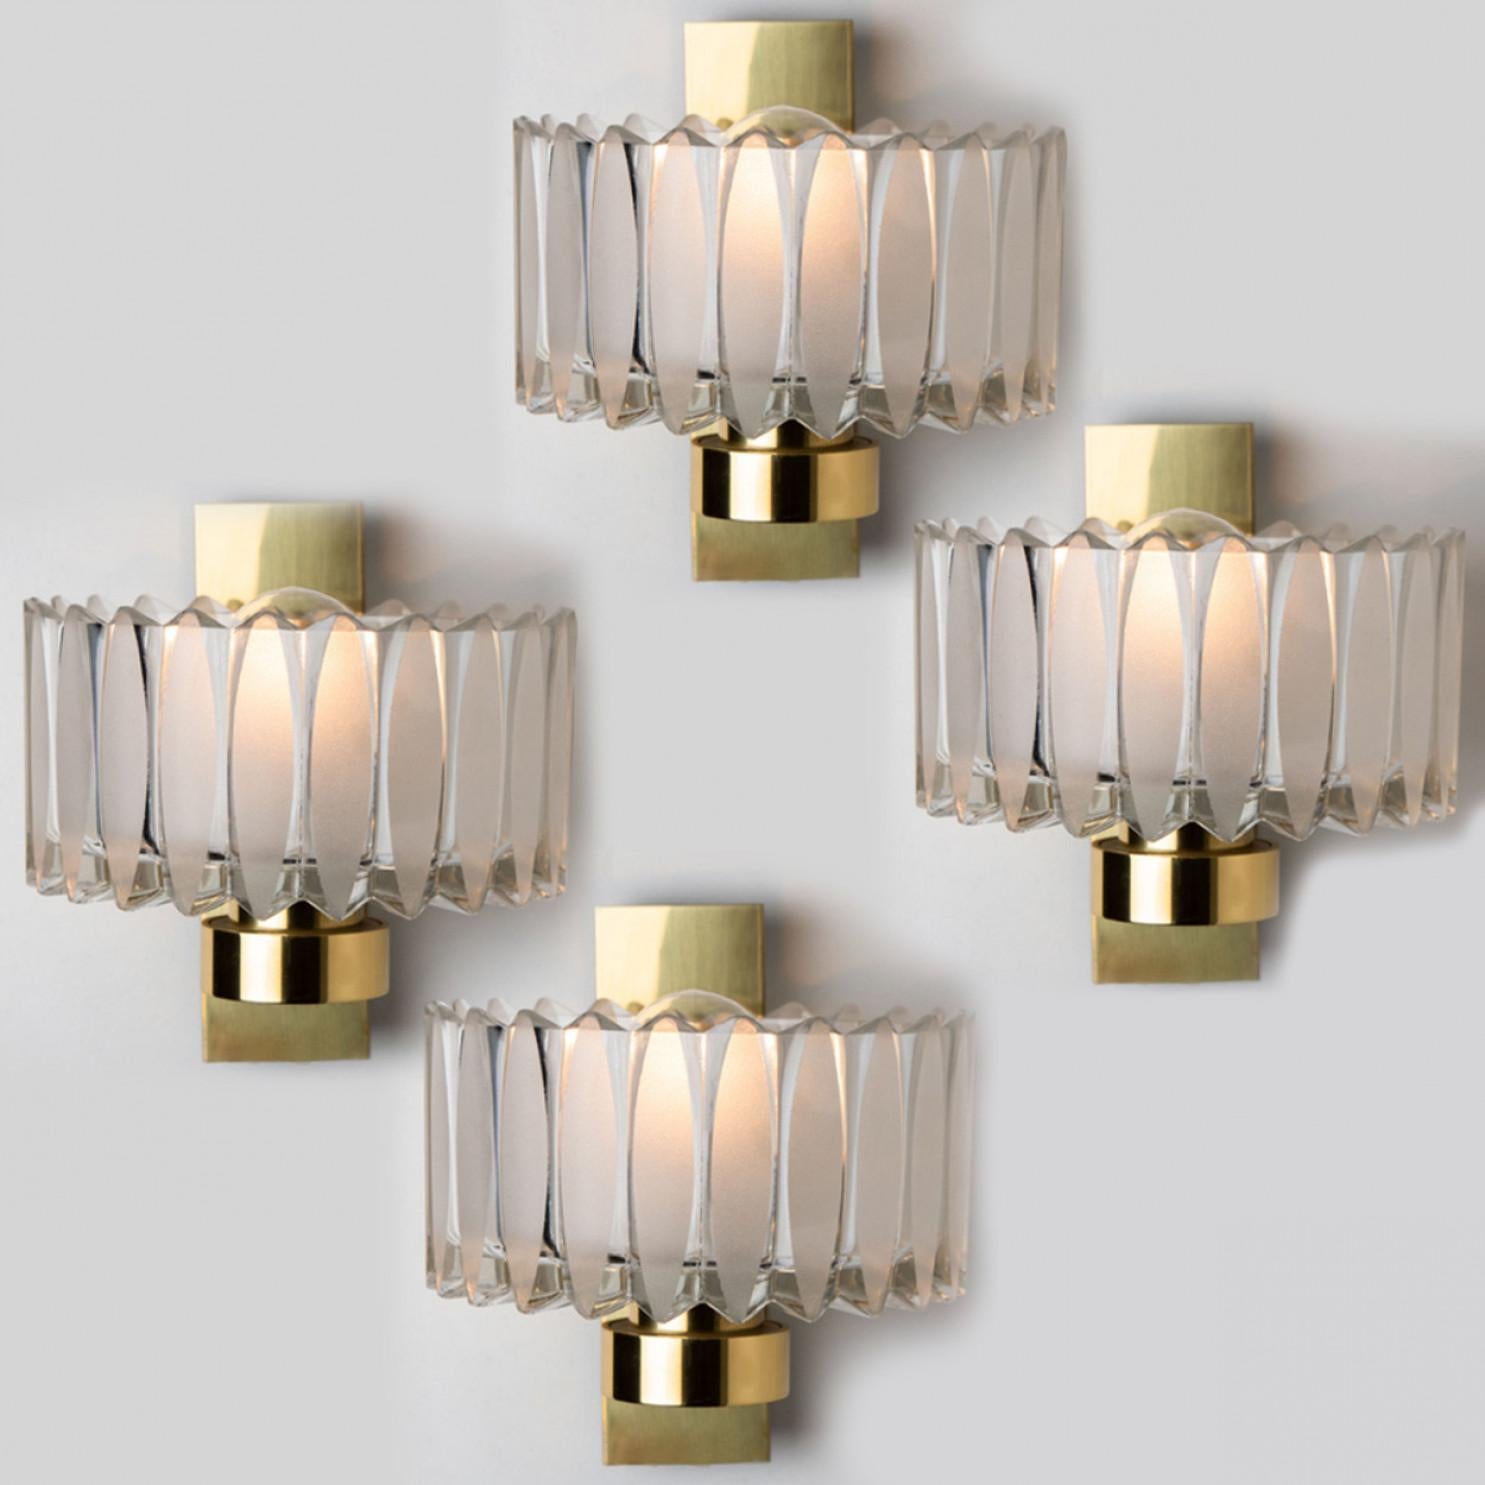 Mid-Century Modern 1 of the 2 Sets Hillebrand Brass and Glass Wall Light Fixtures, 1970s For Sale